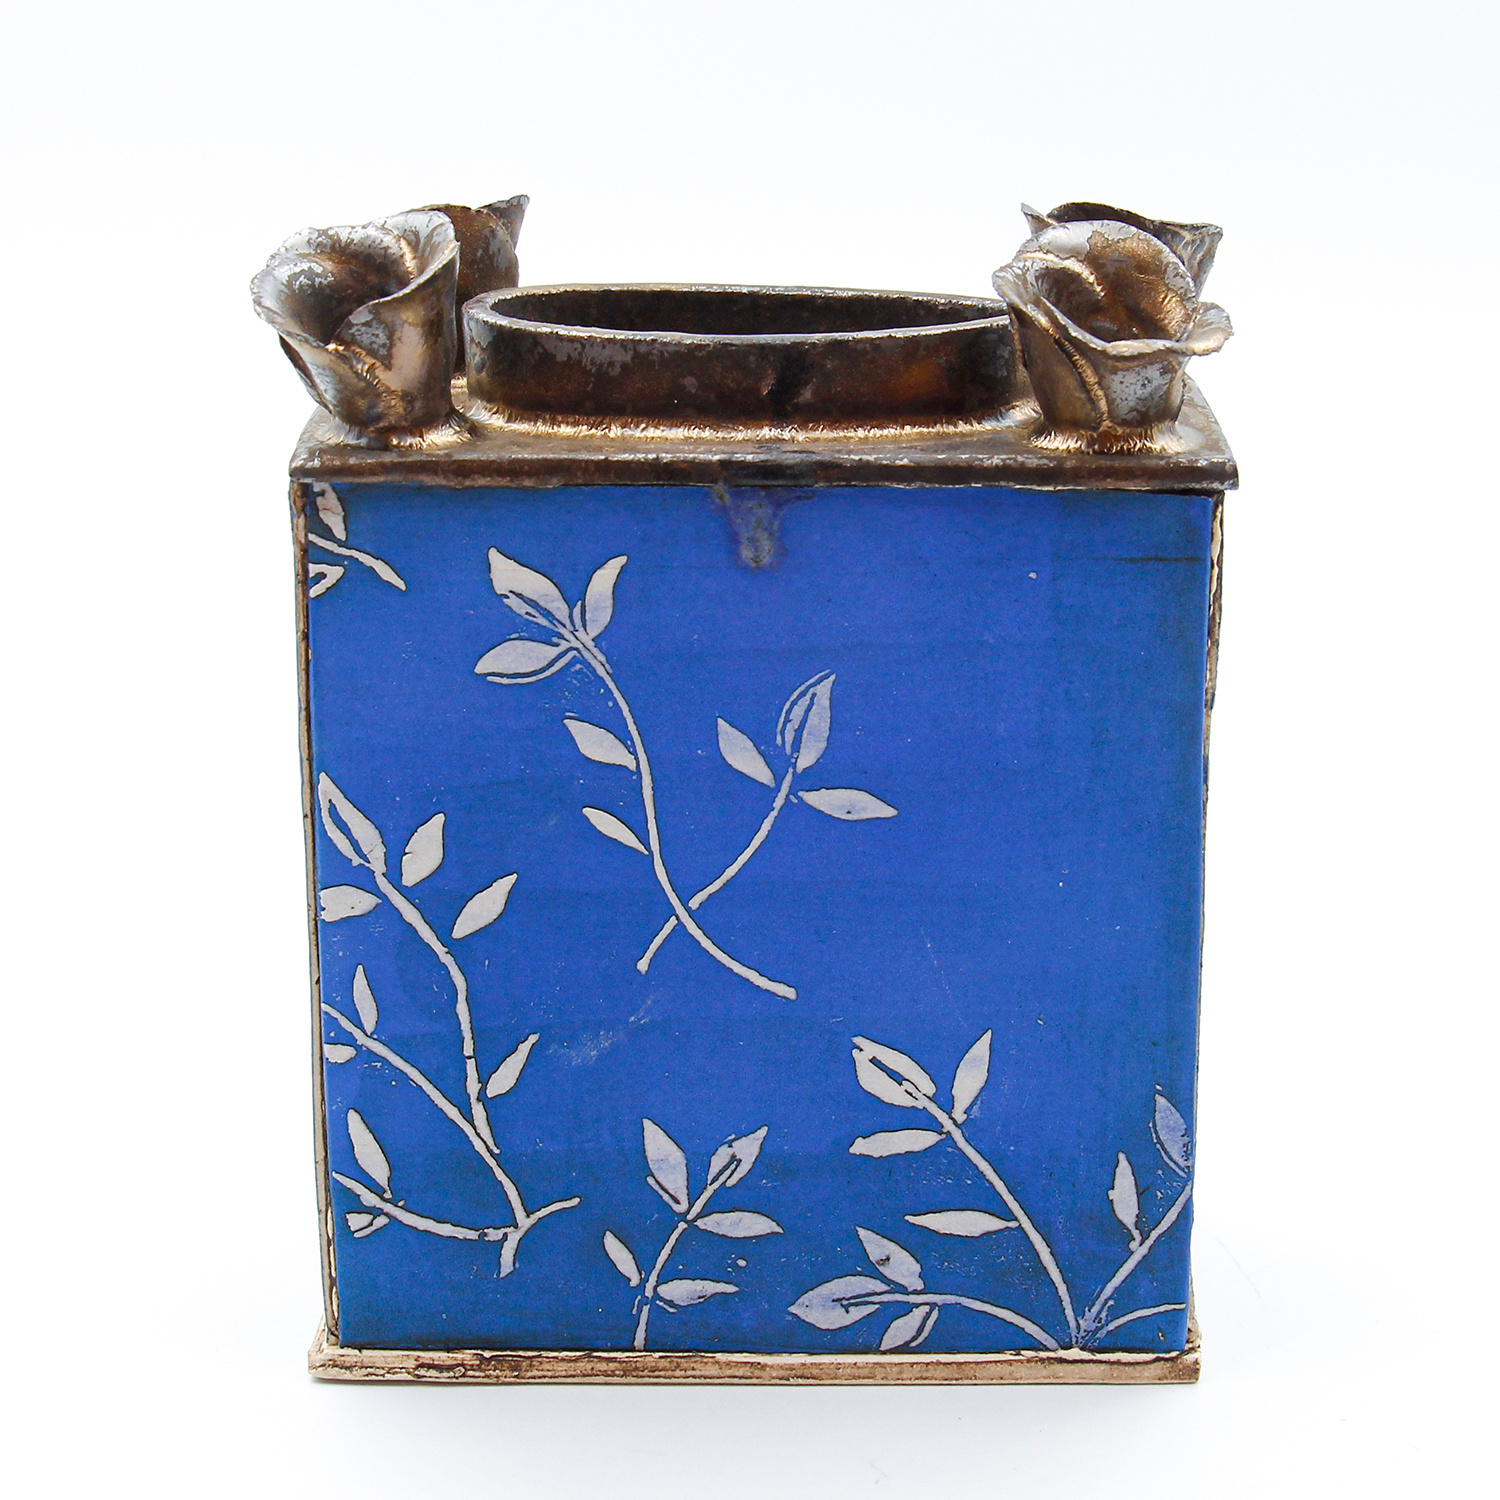 Electric Blue Flower Brick with bronze flowers by Sarah Dunstan